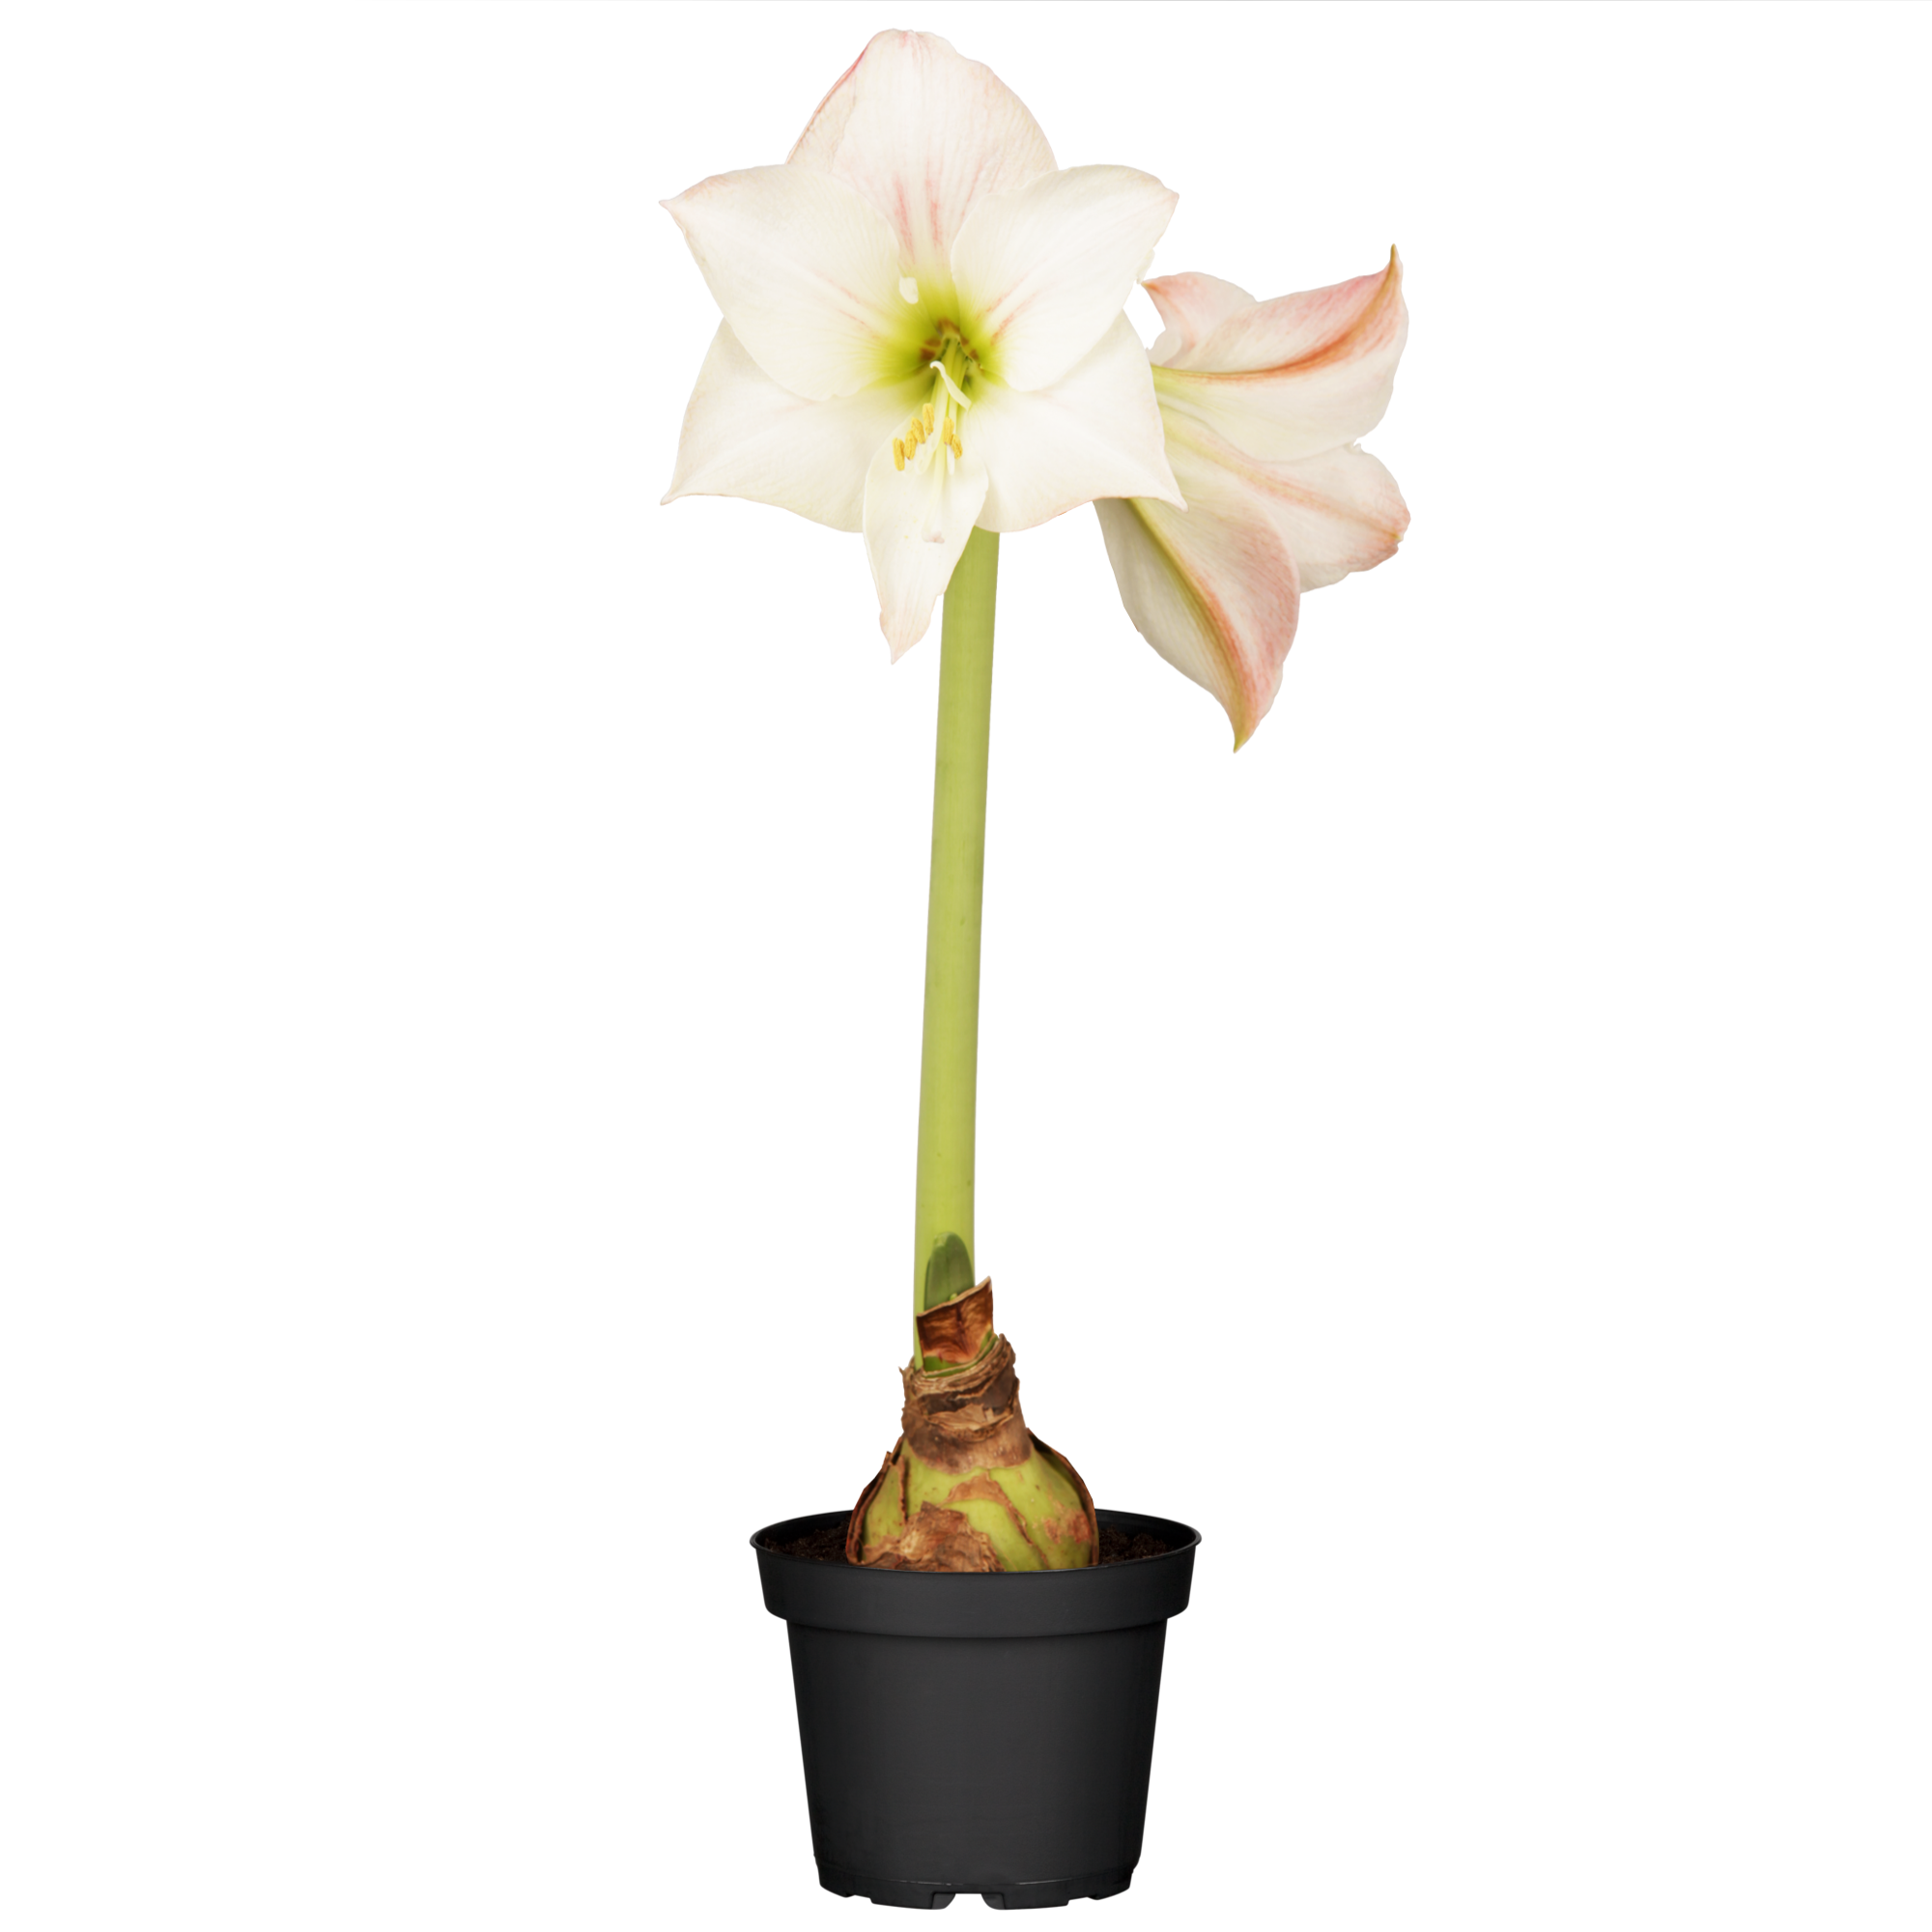 Amaryllis weiß-pink 12 cm Topf + product picture